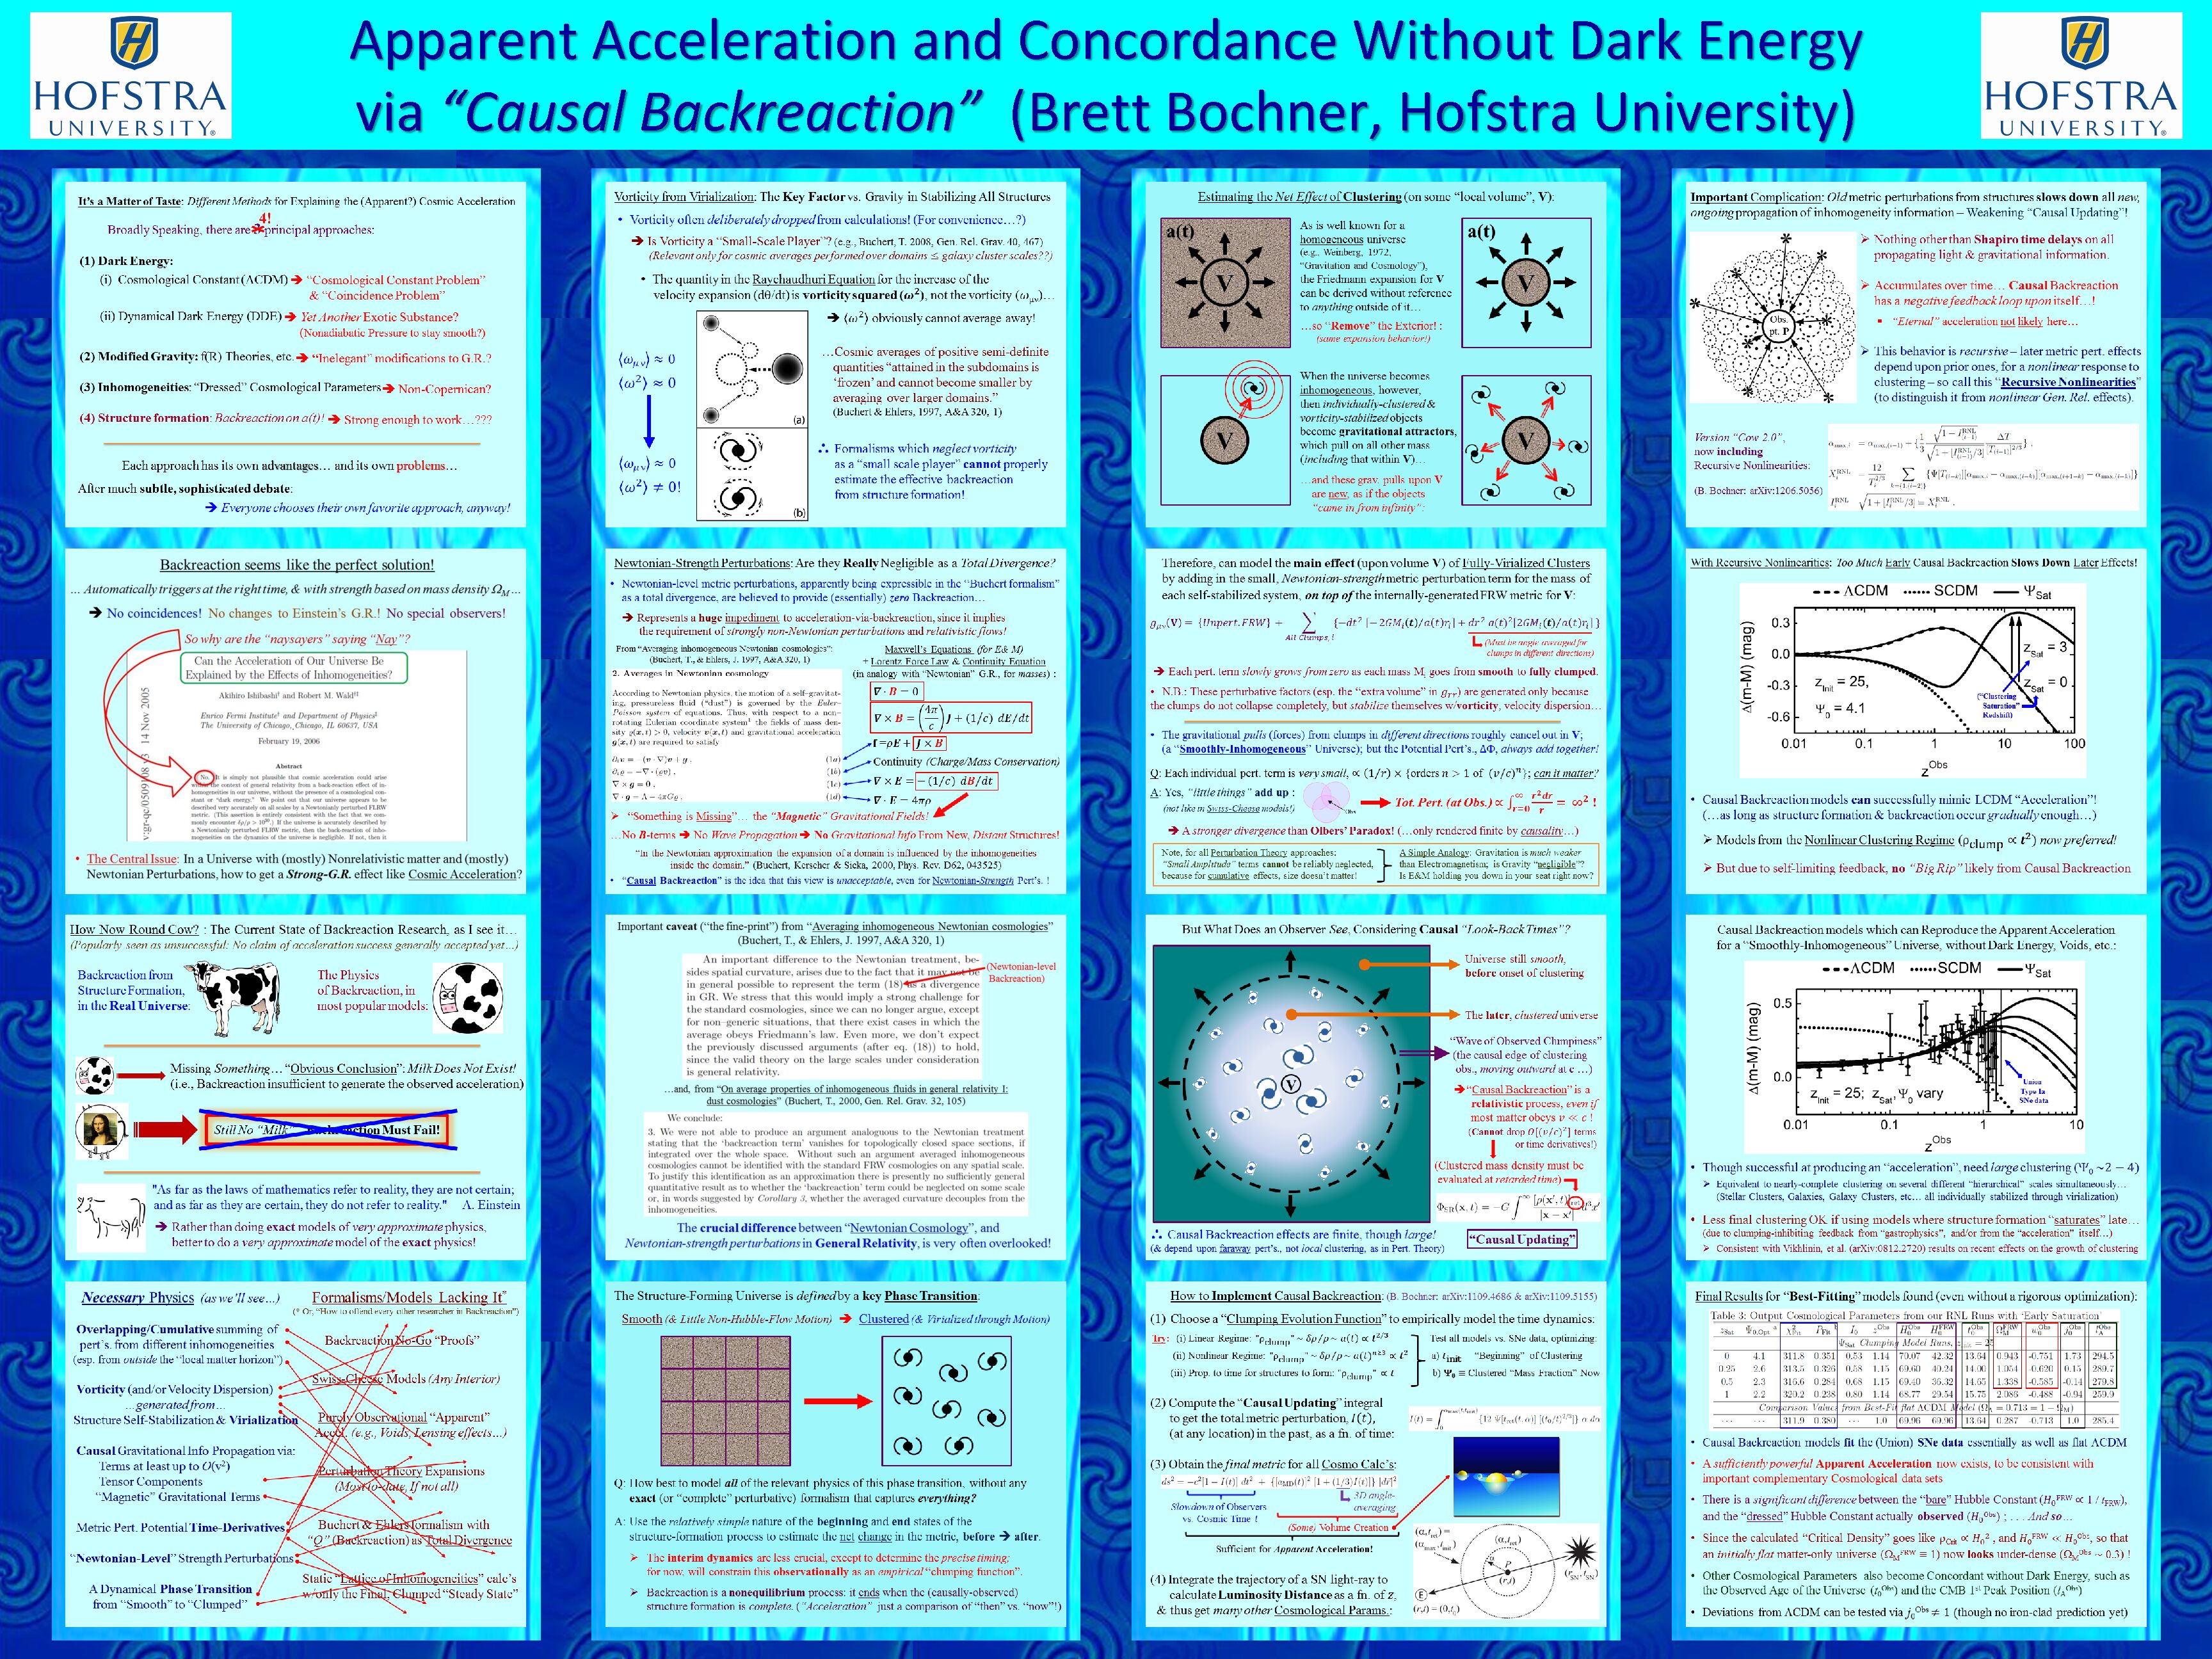 Apparent Acceleration and Concordance Without Dark Energy via